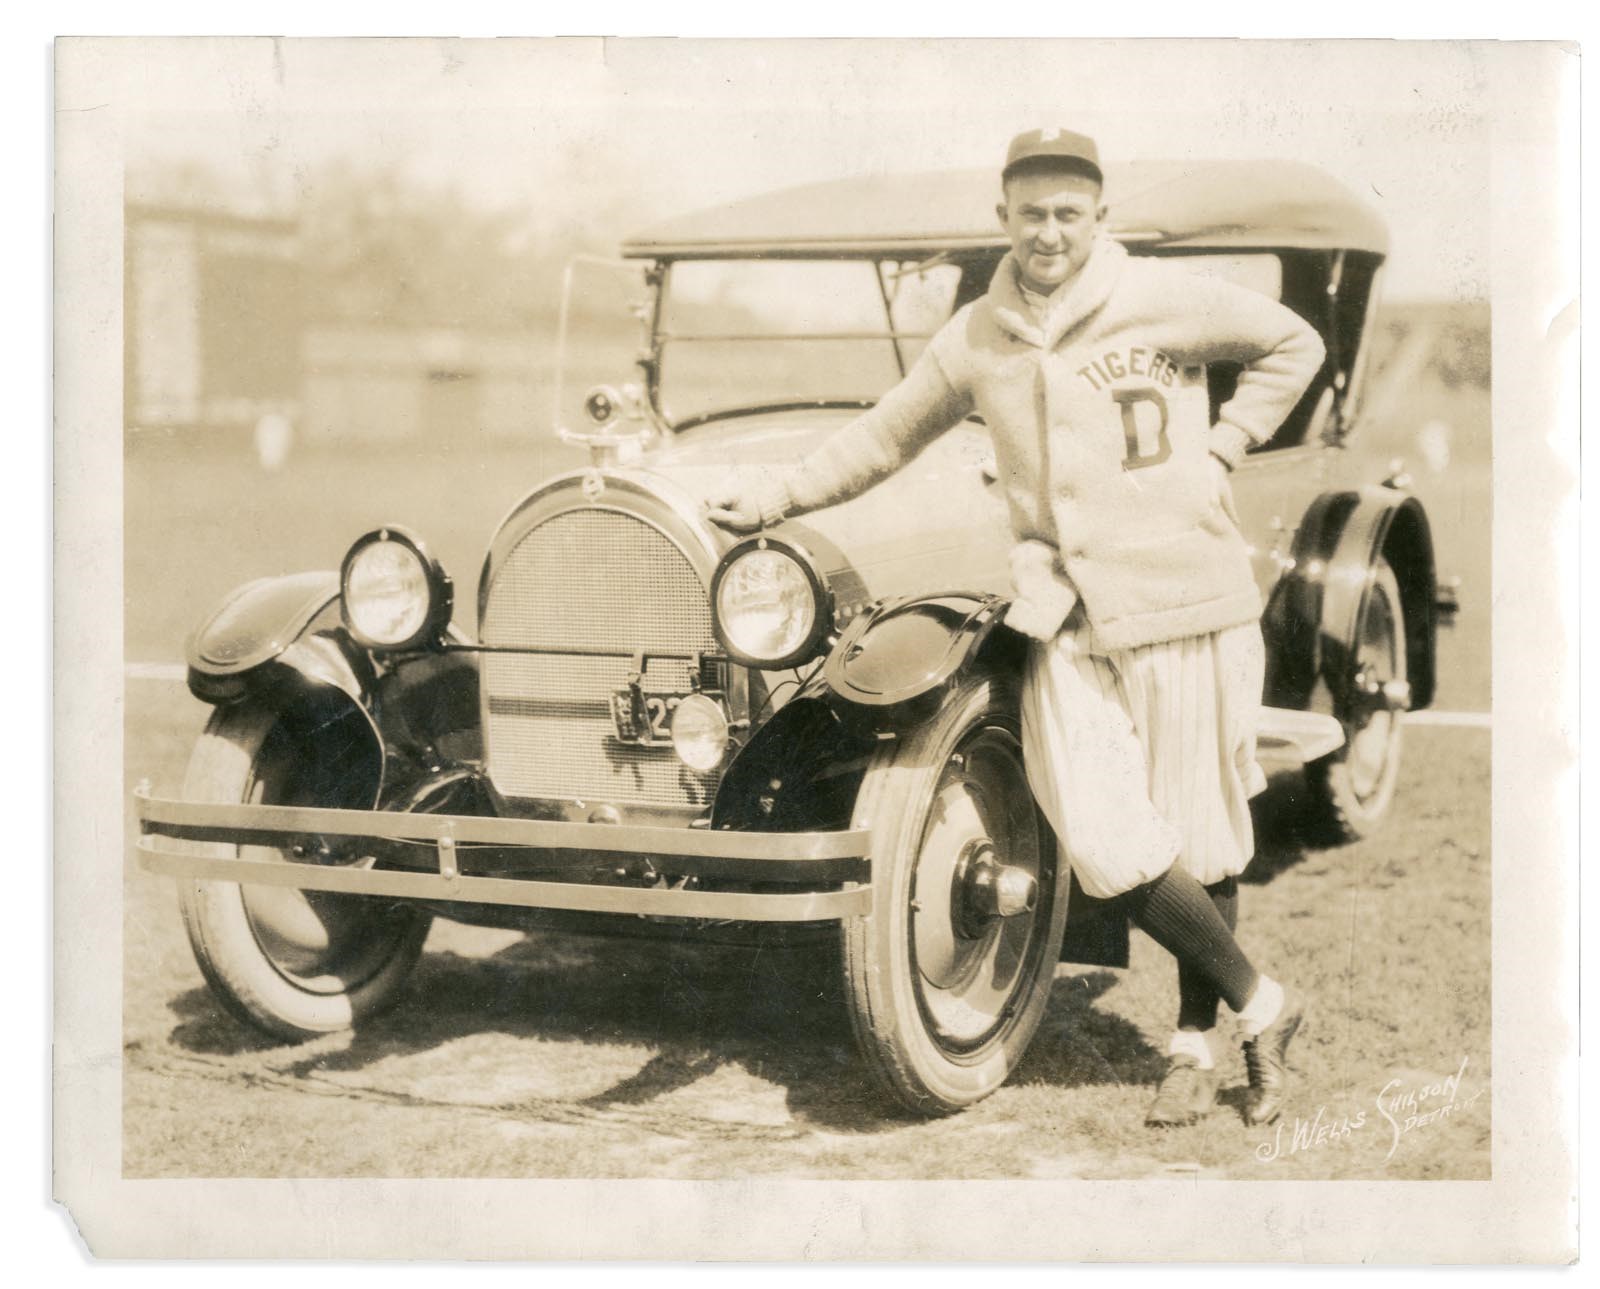 Vintage Sports Photographs - Ty Cobb In His Sweater Type 1 Photo by J. Wells Chilson